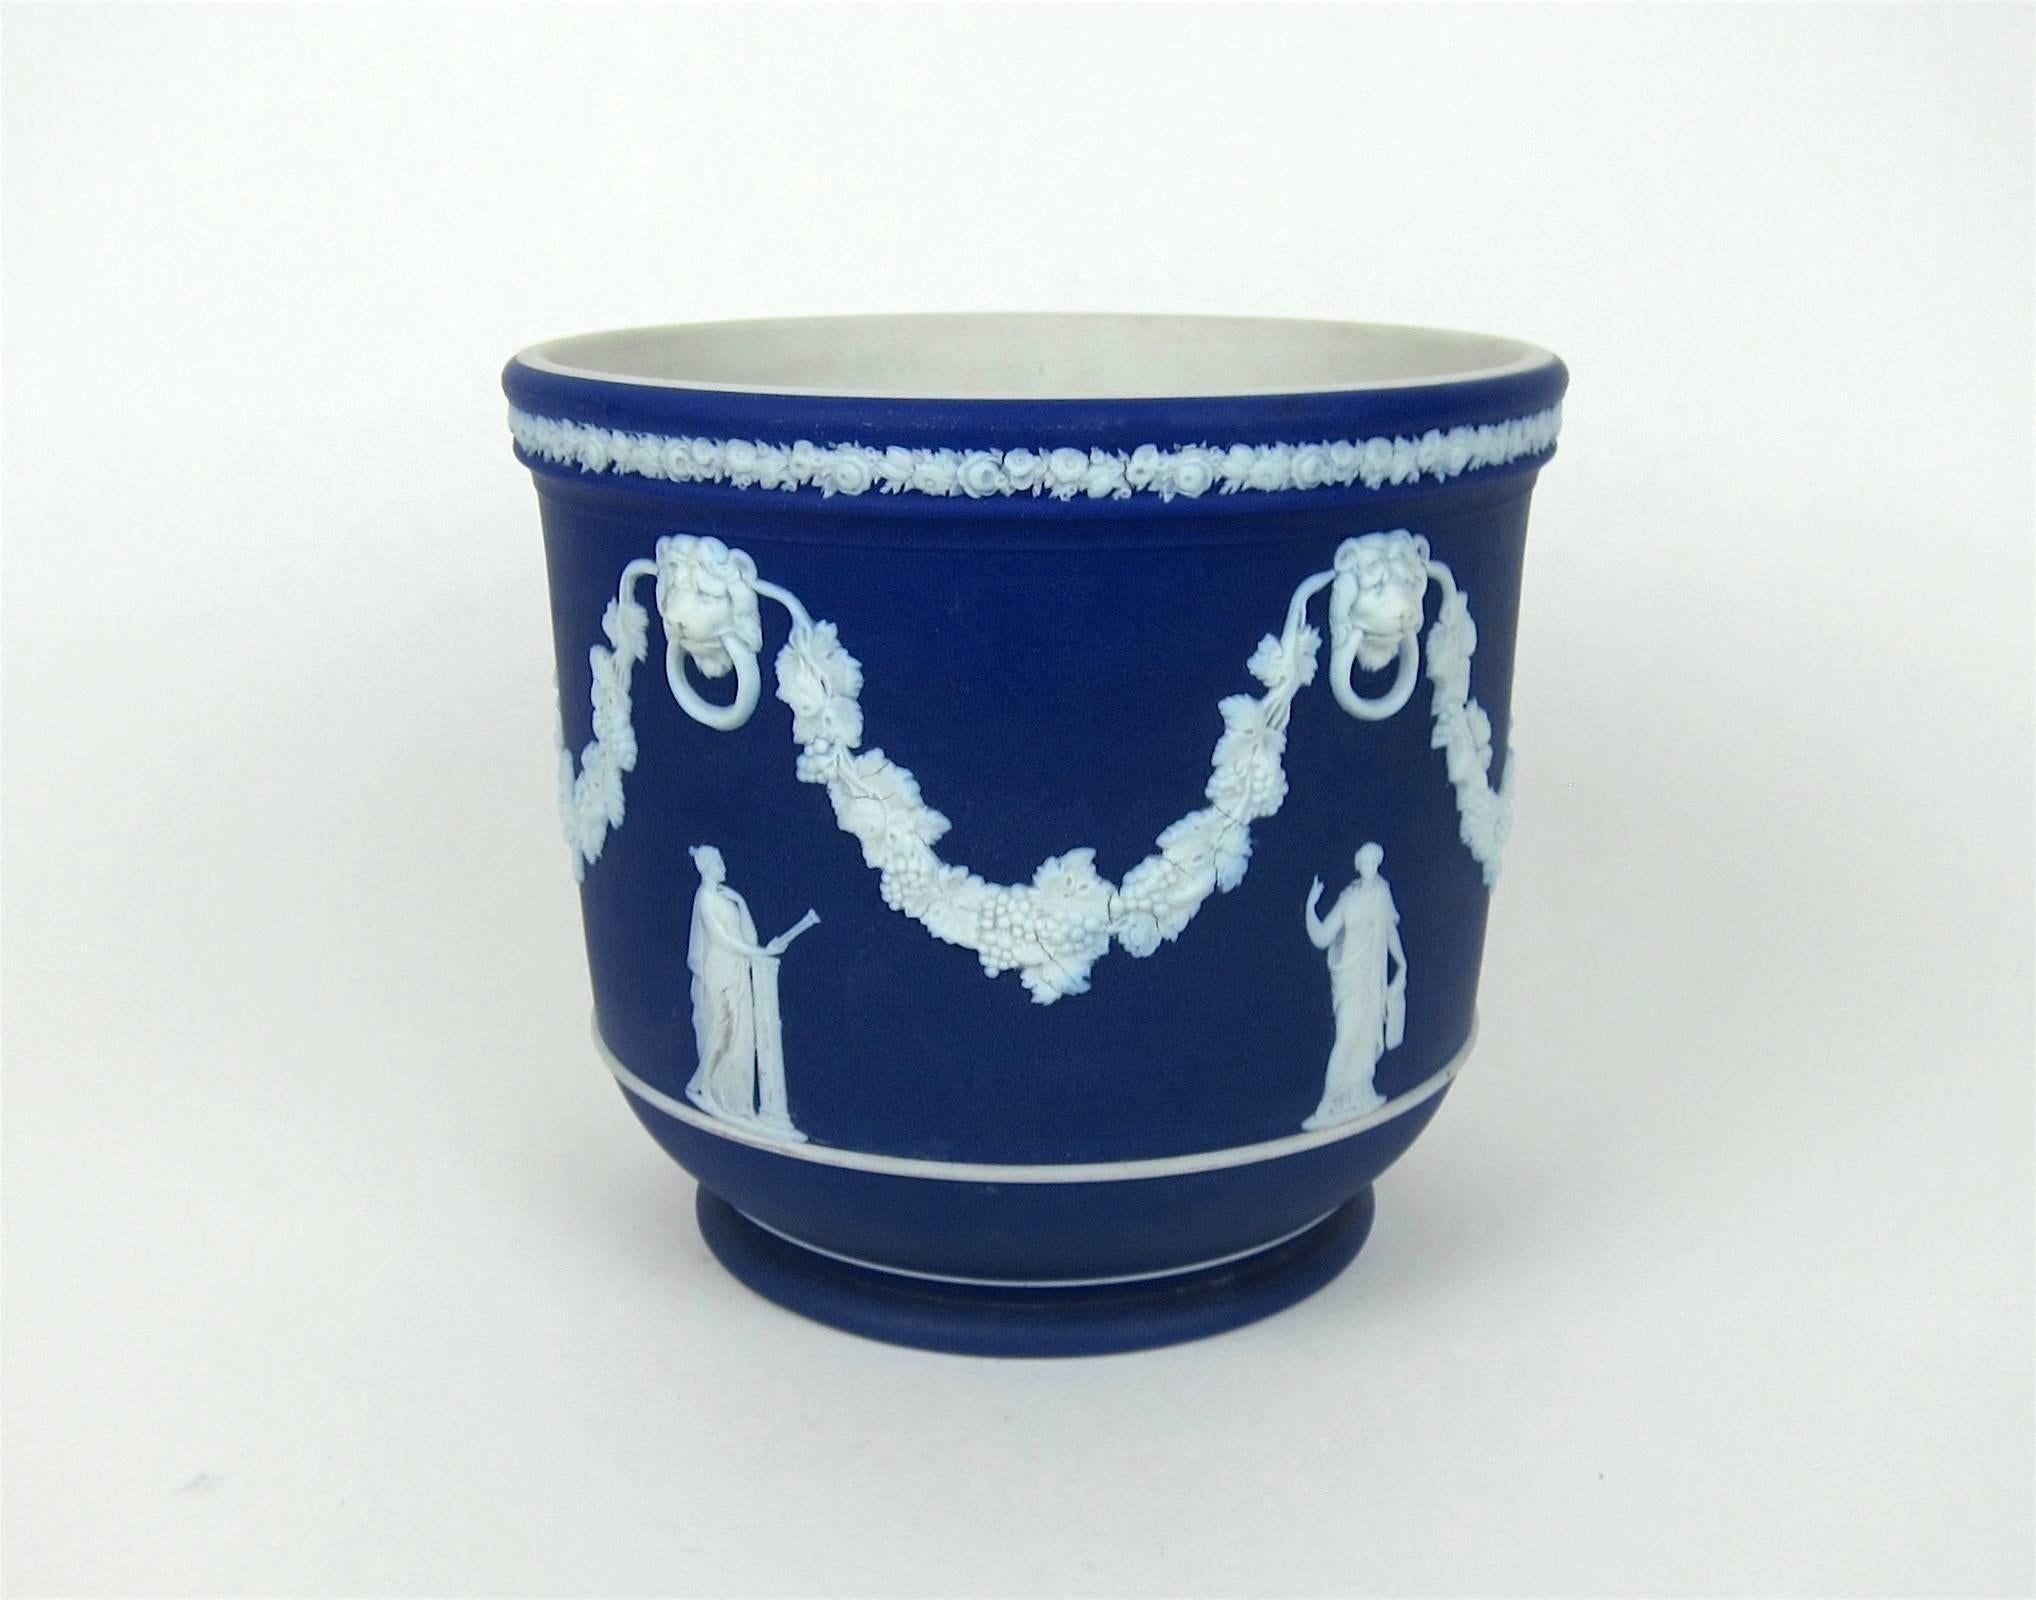 A large, antique Wedgwood Jasper dip cache pot or jardiniere in dark cobalt blue with a contrasting white interior and neoclassical style ornament applied in relief. The exterior is decorated with an intricate floral border encircling the rim, white